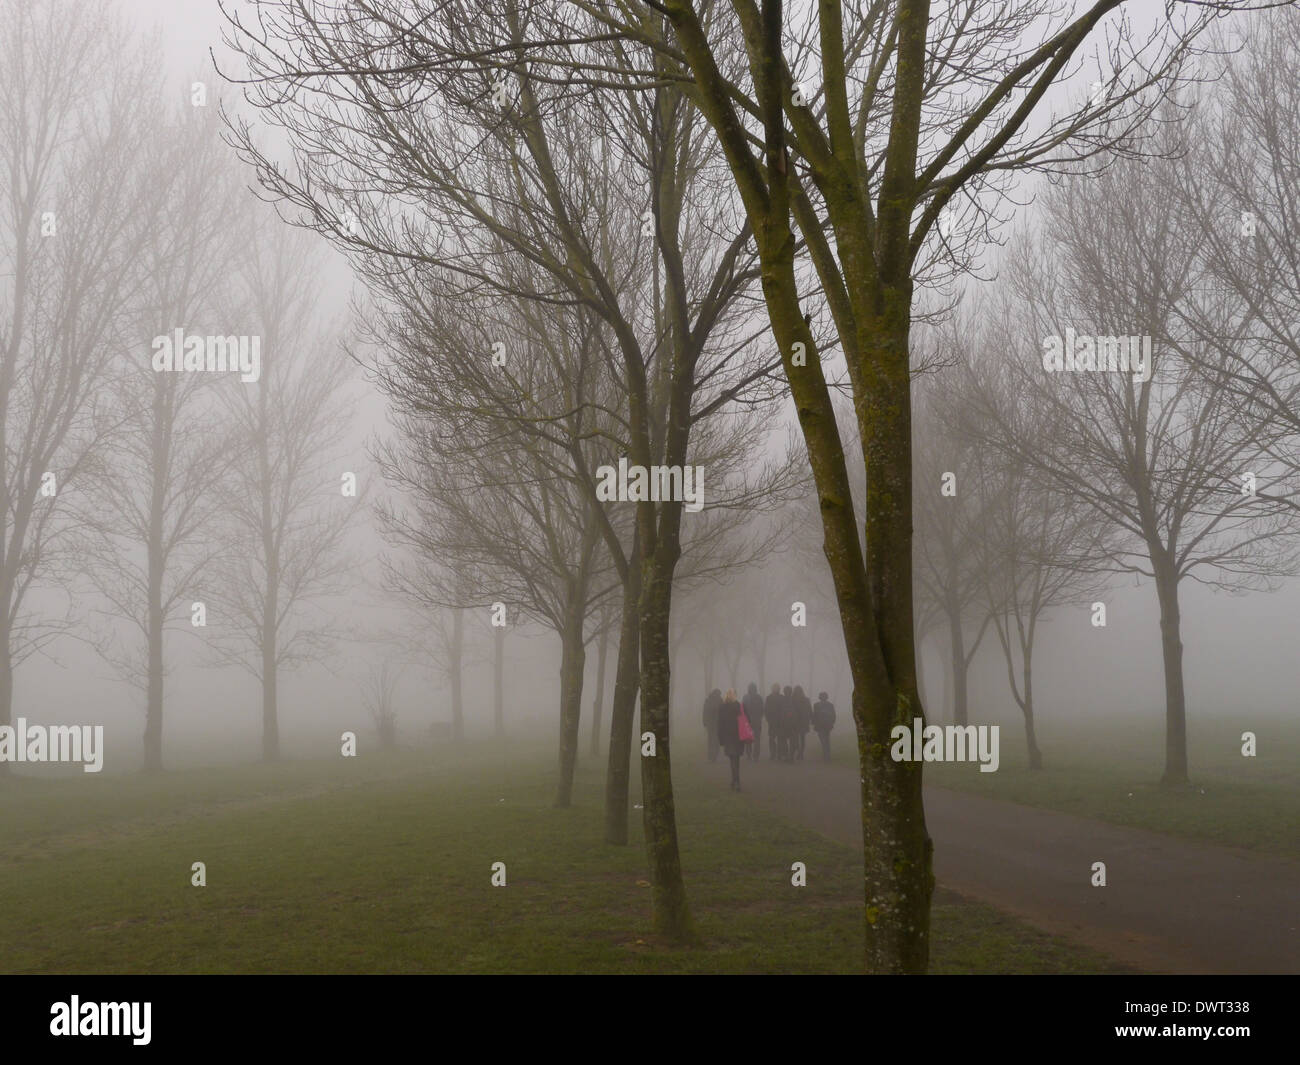 A group of school children walking to school in the fog through the trees Stock Photo